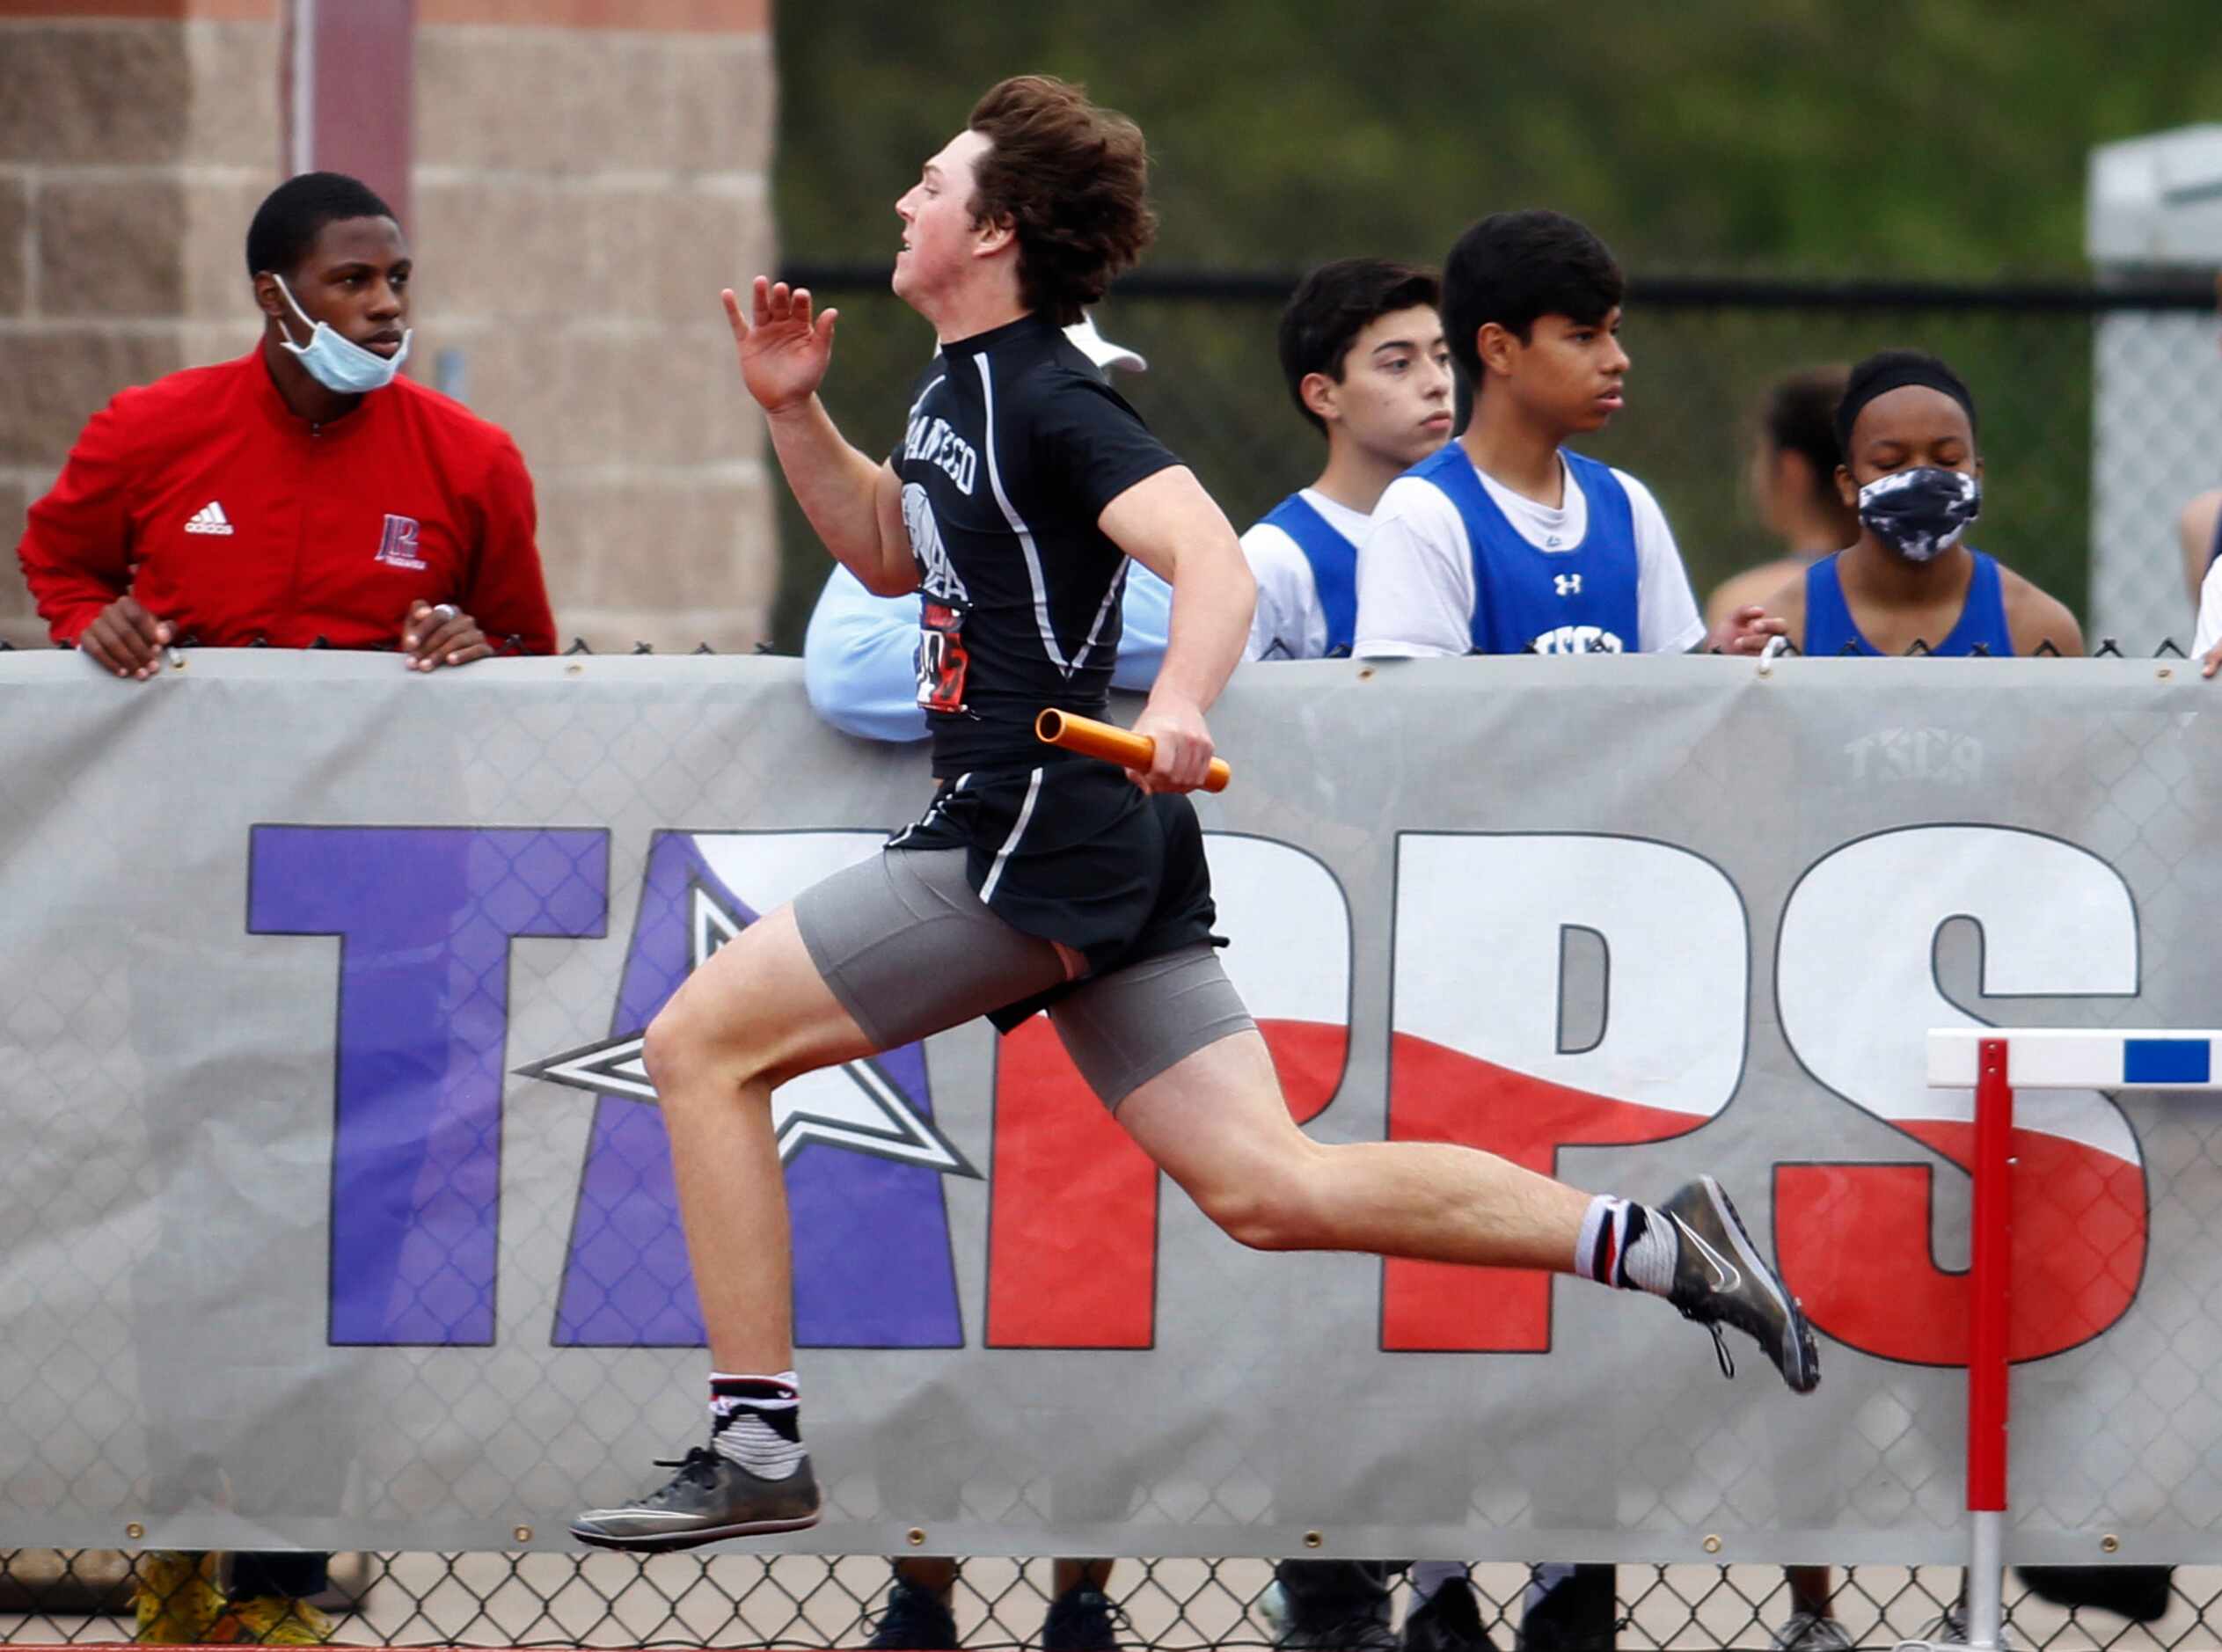 A sprinter races past a TAPPS sign during a relay event. The running finals from the TAPPS...